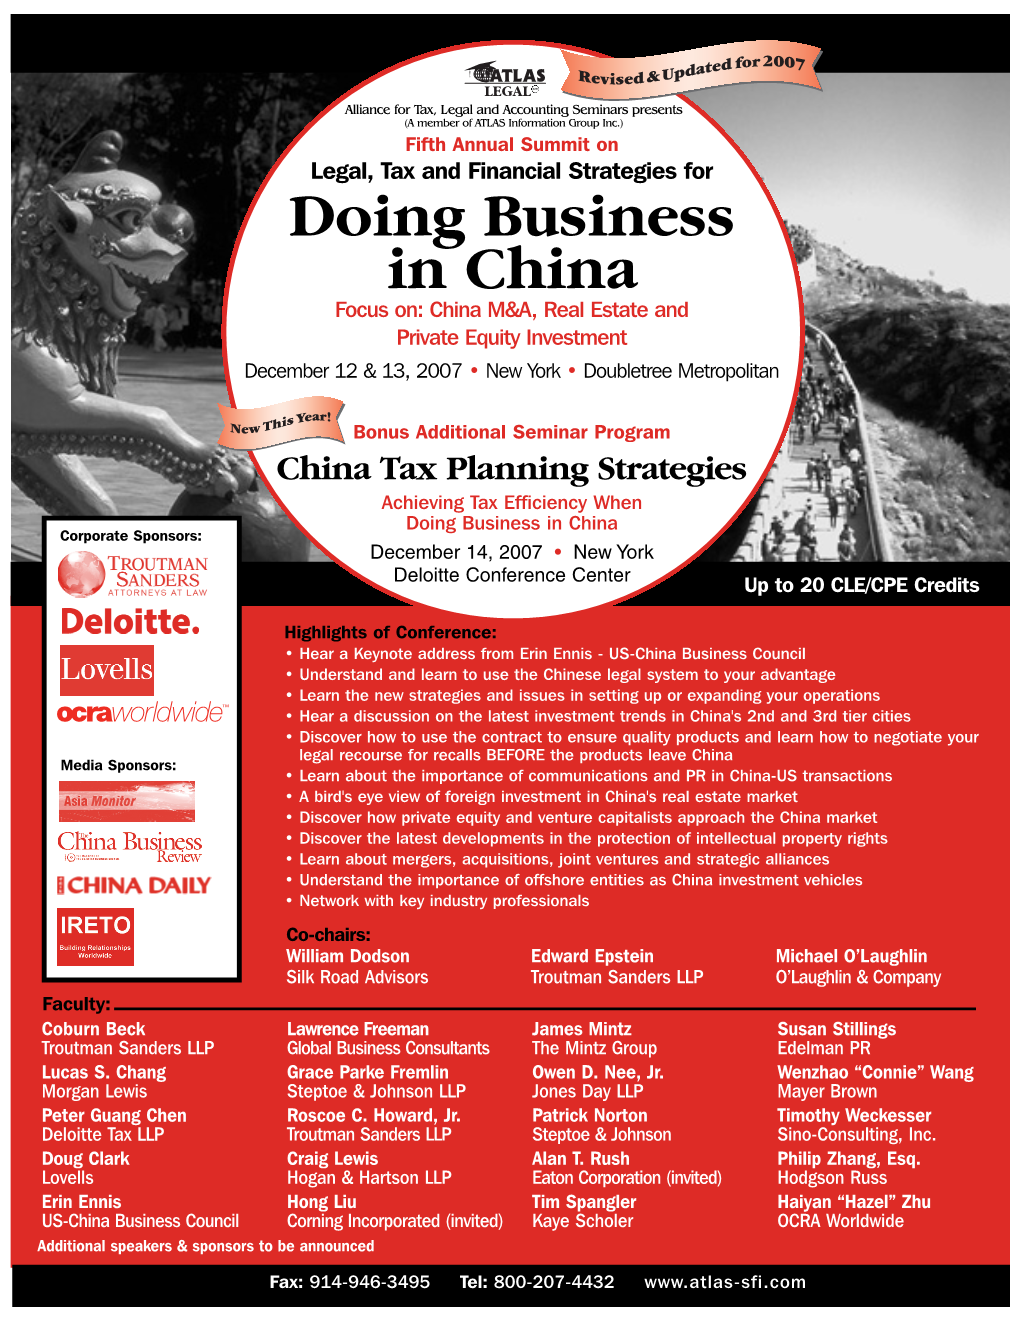 Doing Business in China Focus On: China M&A, Real Estate and Private Equity Investment December 12 & 13, 2007 • New York • Doubletree Metropolitan